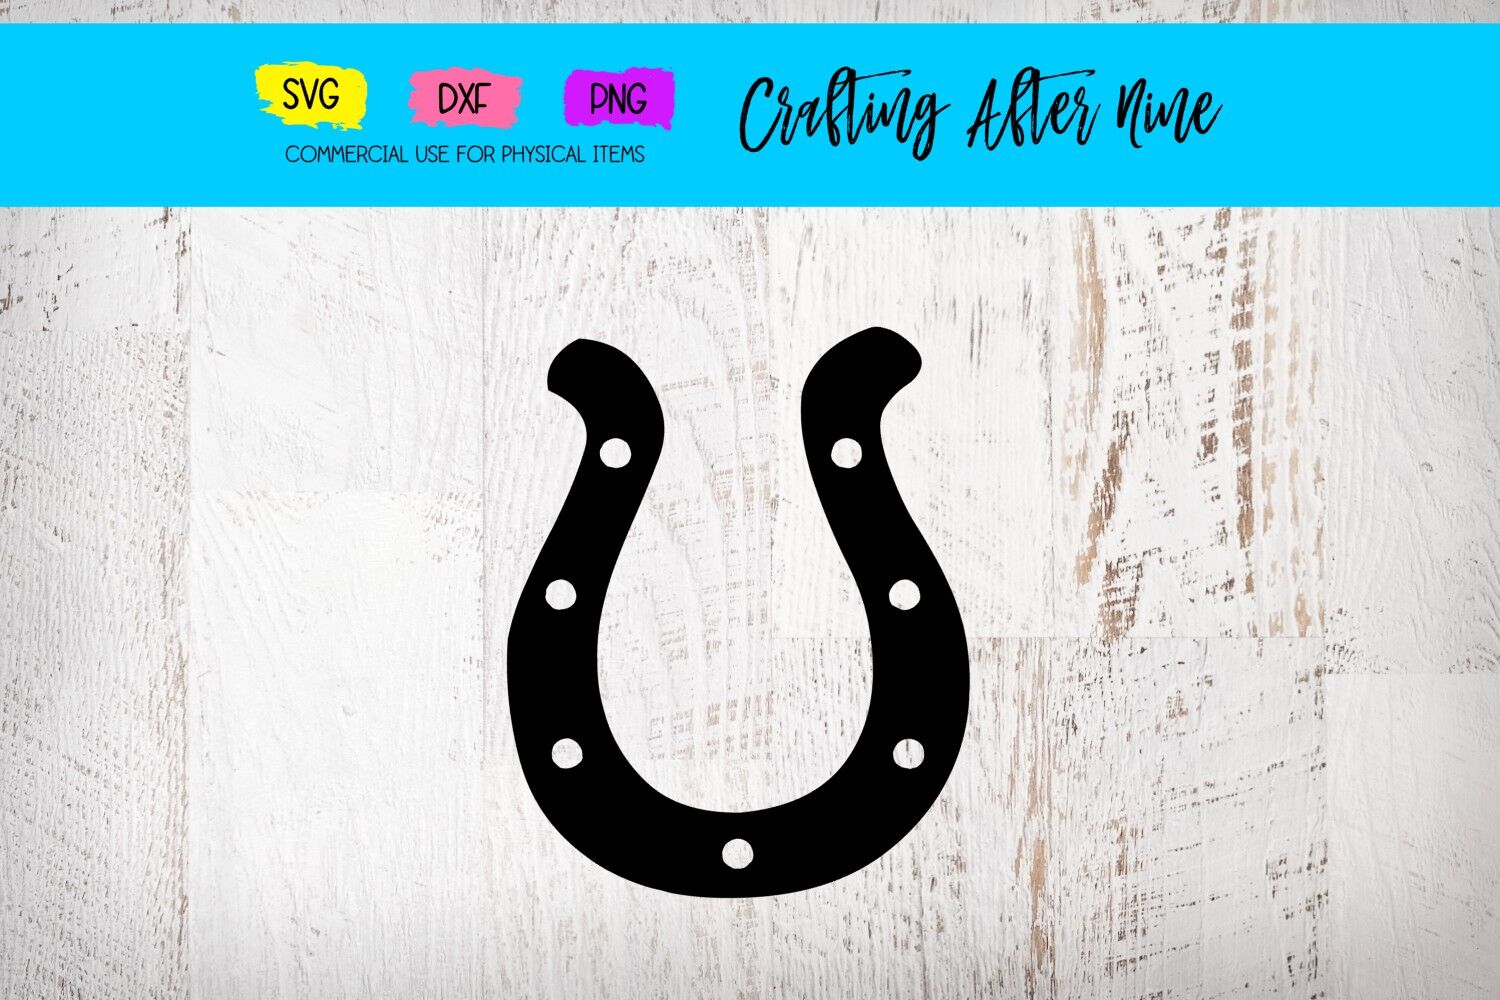 Download Horseshoe Svg Horse Lover Svg Horse Shoe Clipart Silhouette Horse By Crafting After Nine Thehungryjpeg Com